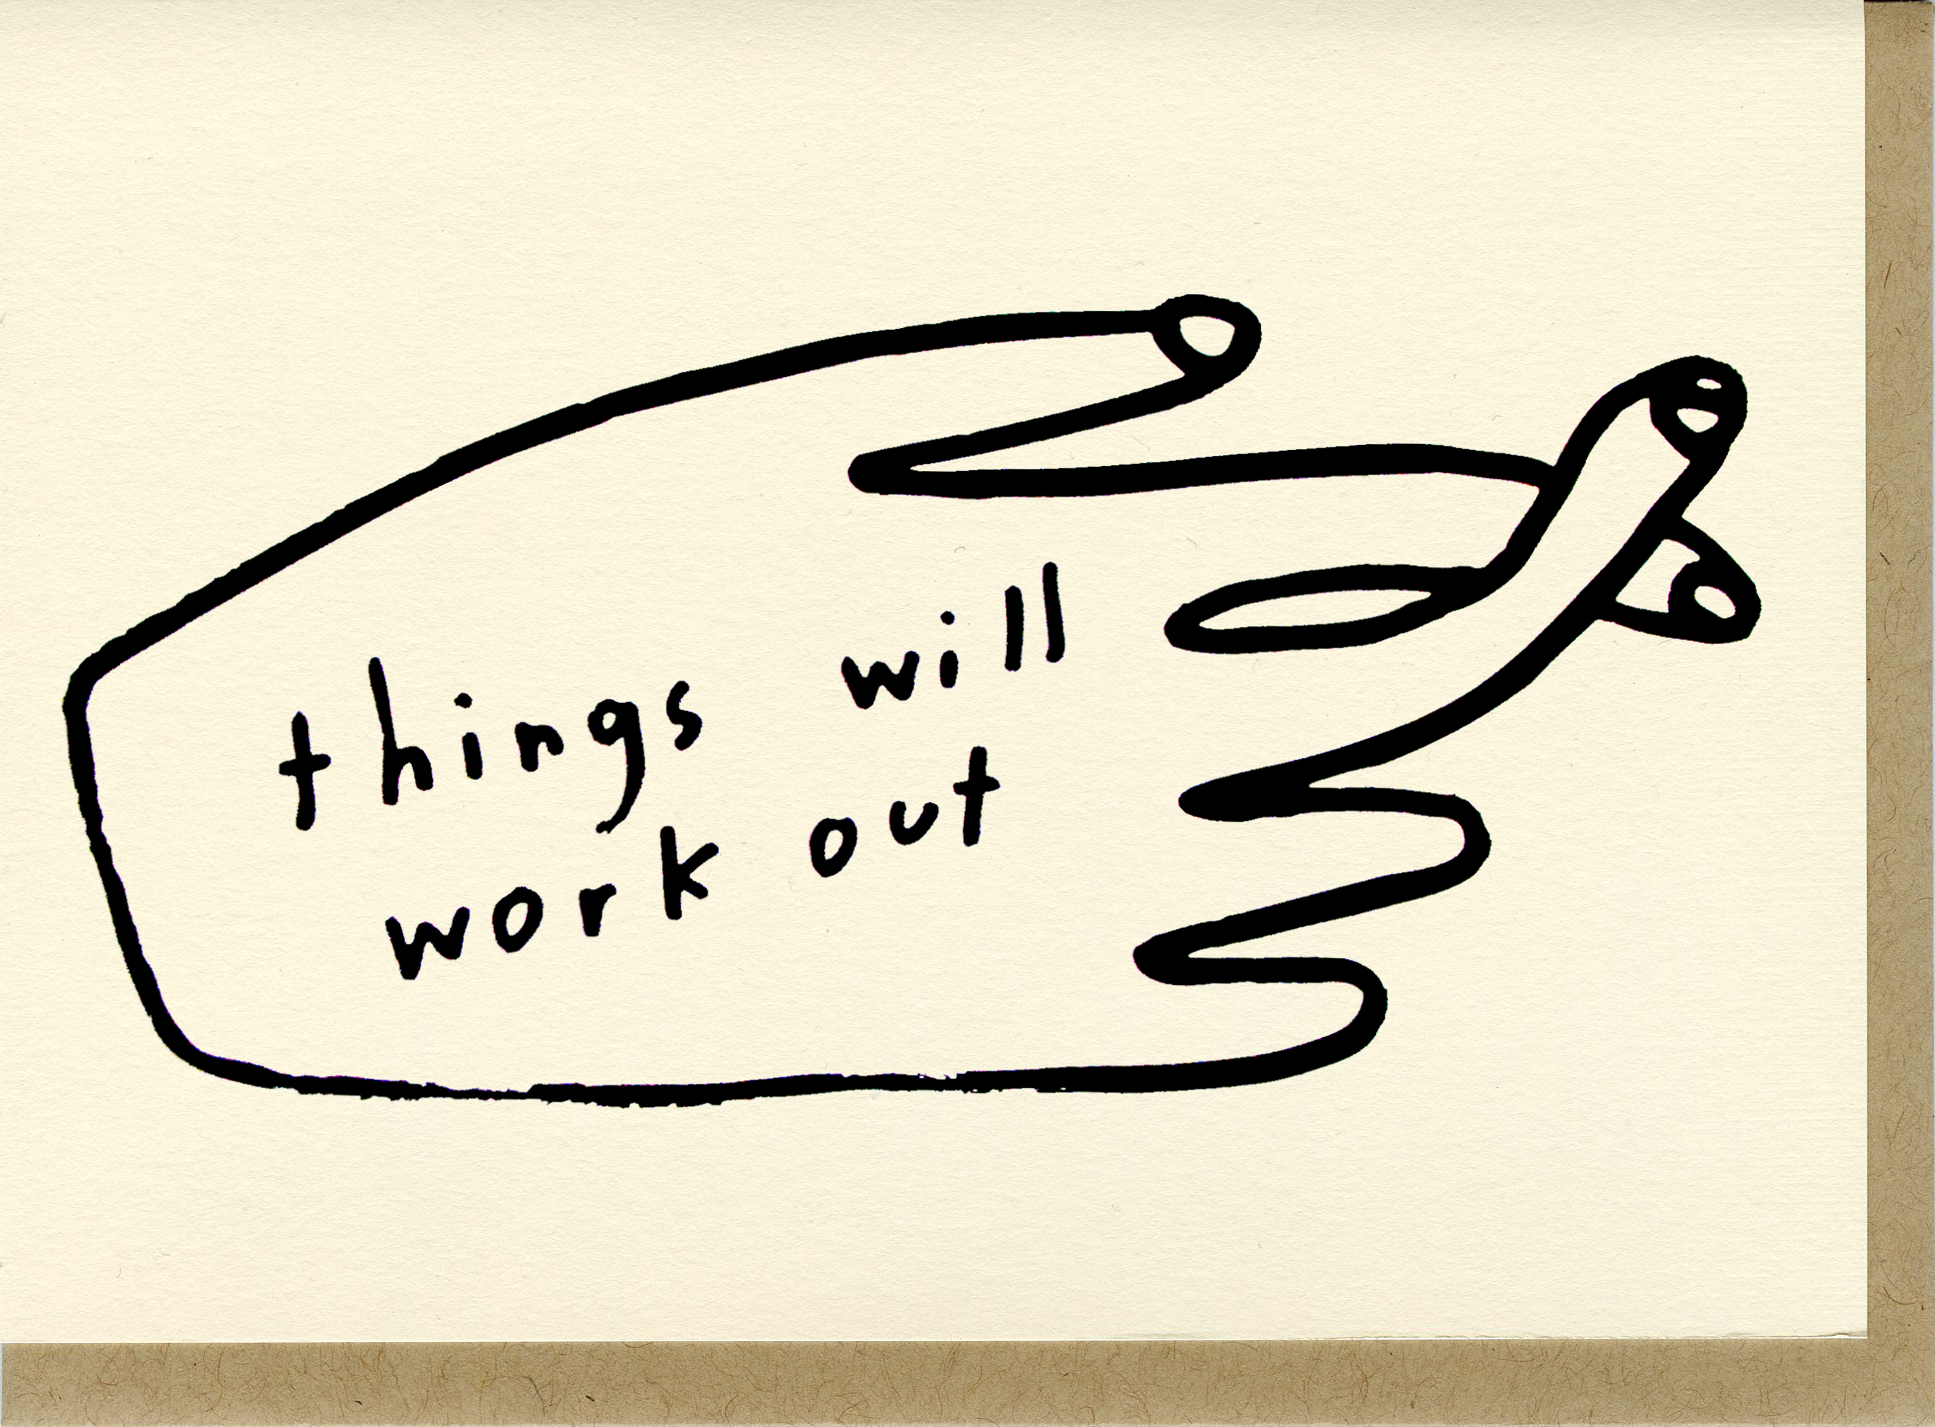 Card - "Things will work out"